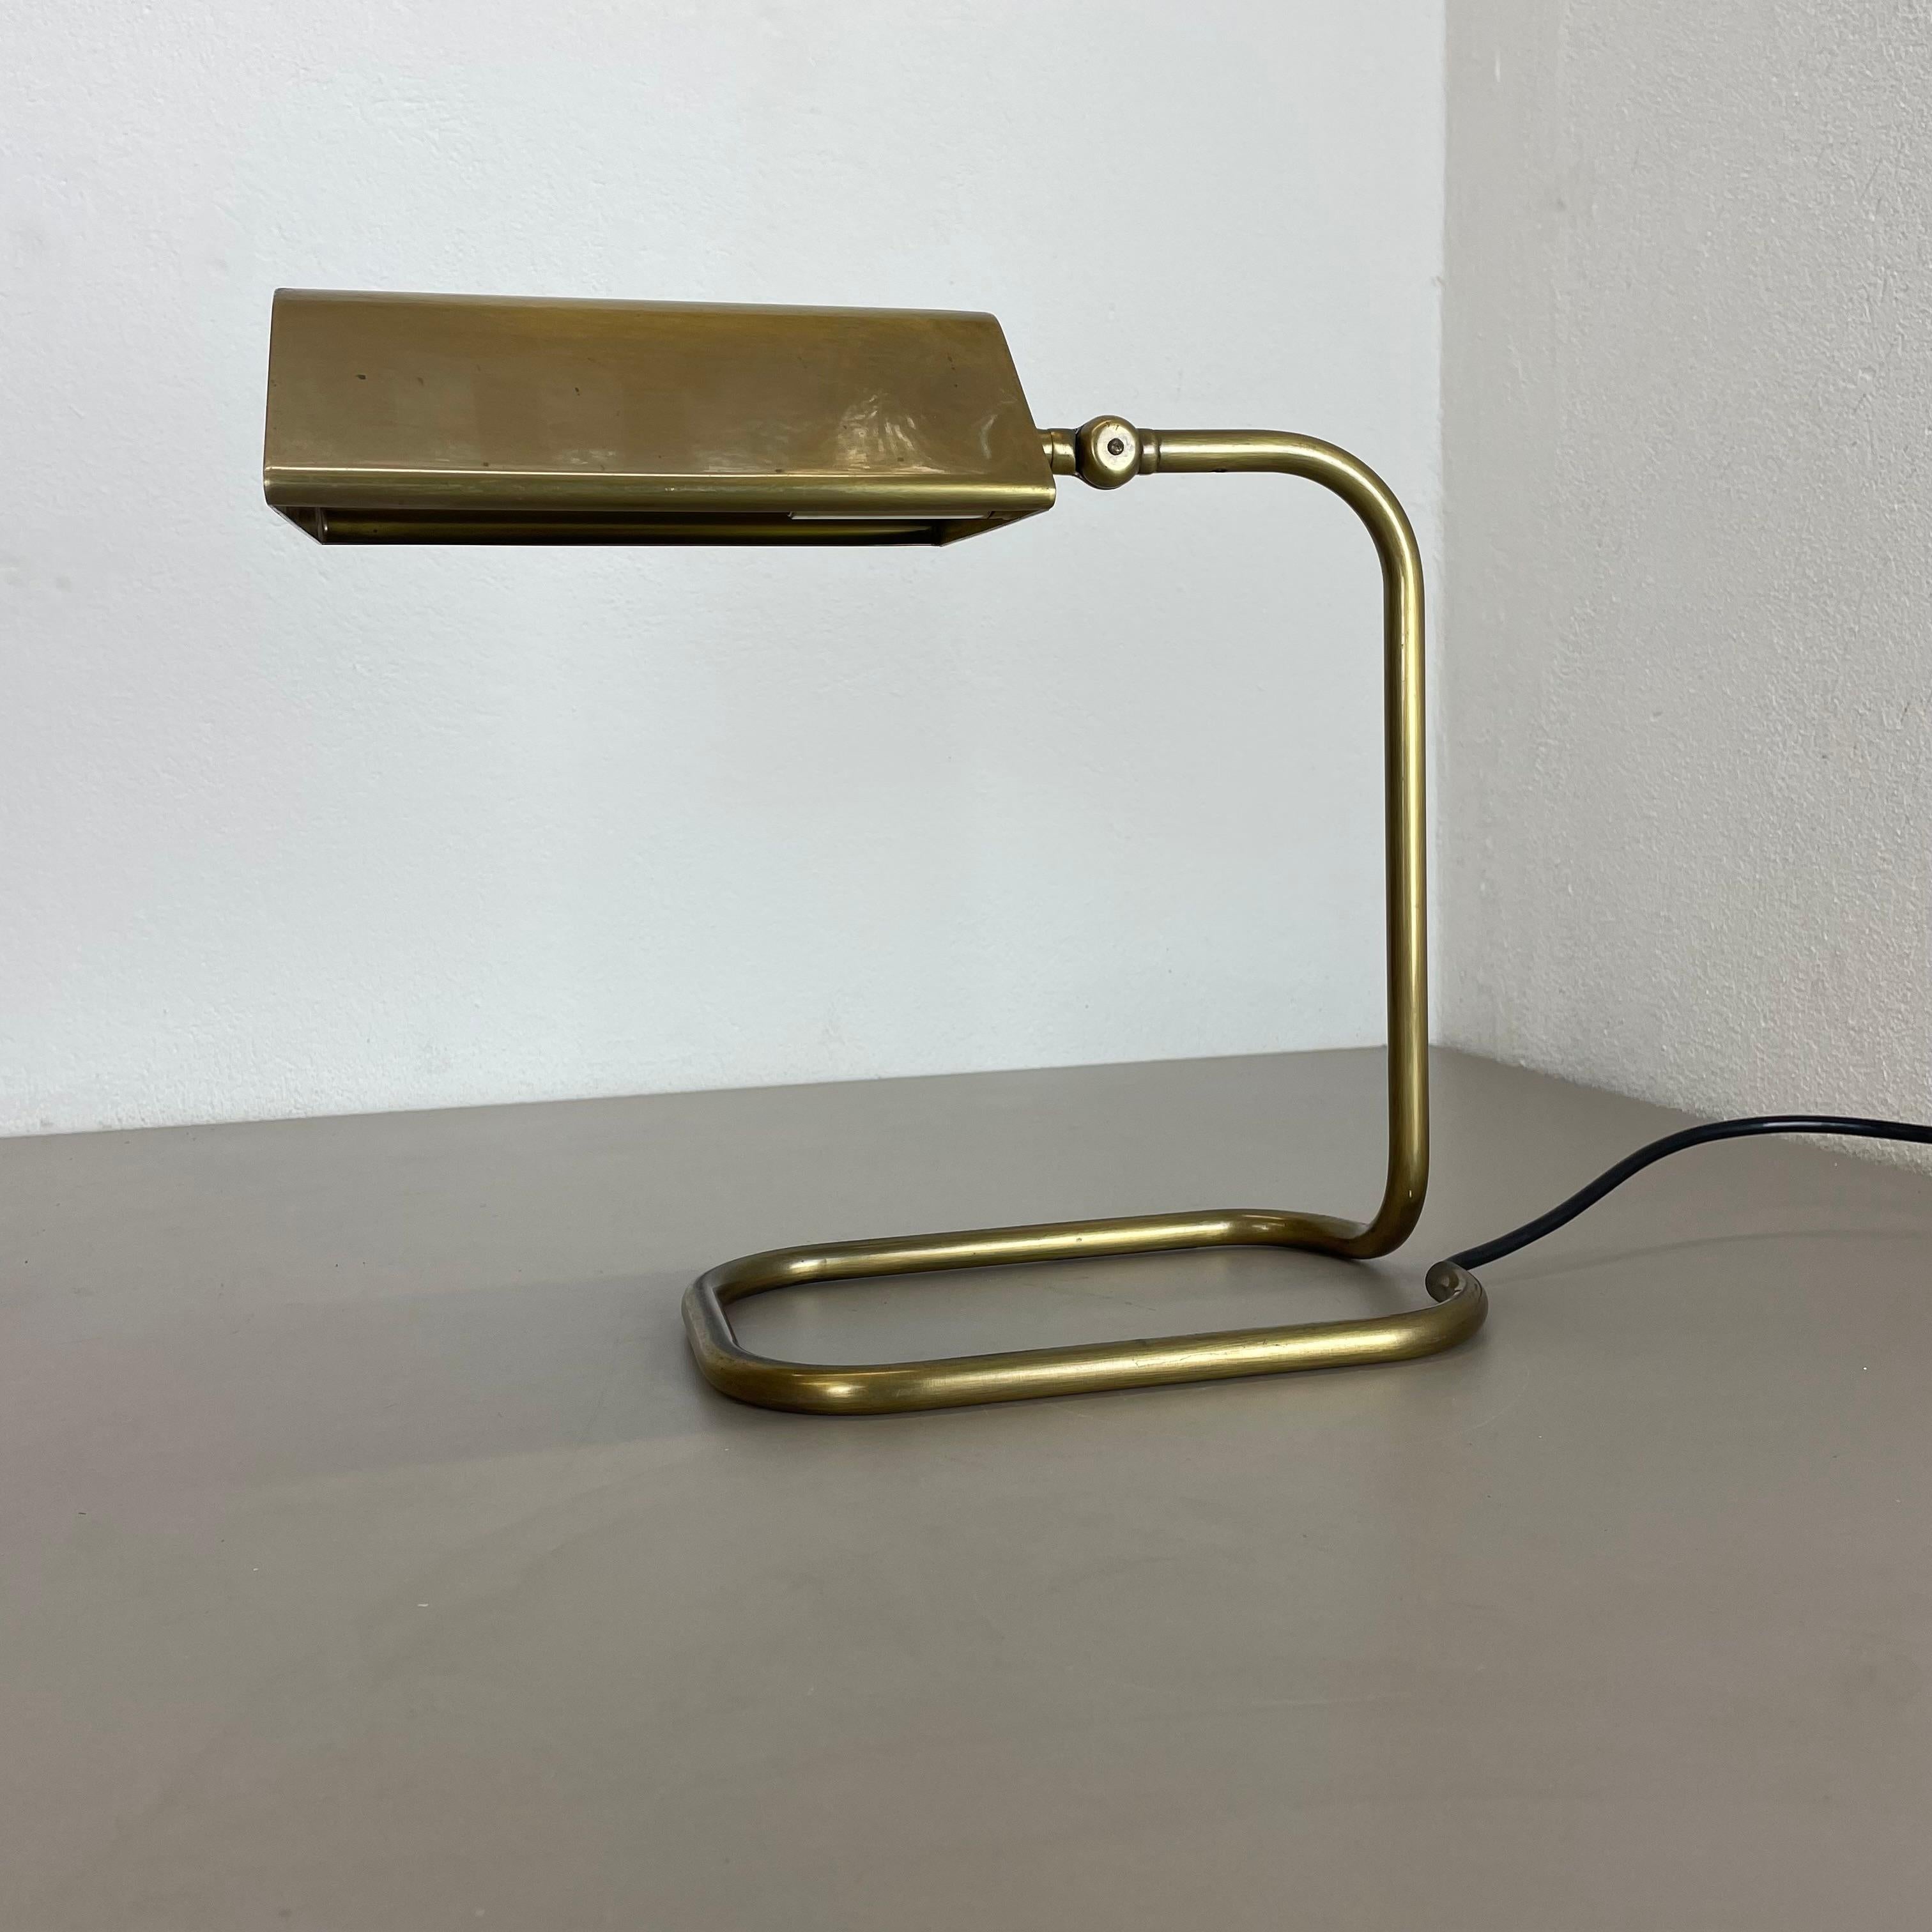 Article:

Table light


Origin:

Germany


Producer:

FLORIAN SCHULZ (marked with REIM INTERLINE, Producer FLORIAN SCHULZ)


Material:

Metal brass


Age:

1970s



Description:

This original vintage table light was designed and produced in Germany